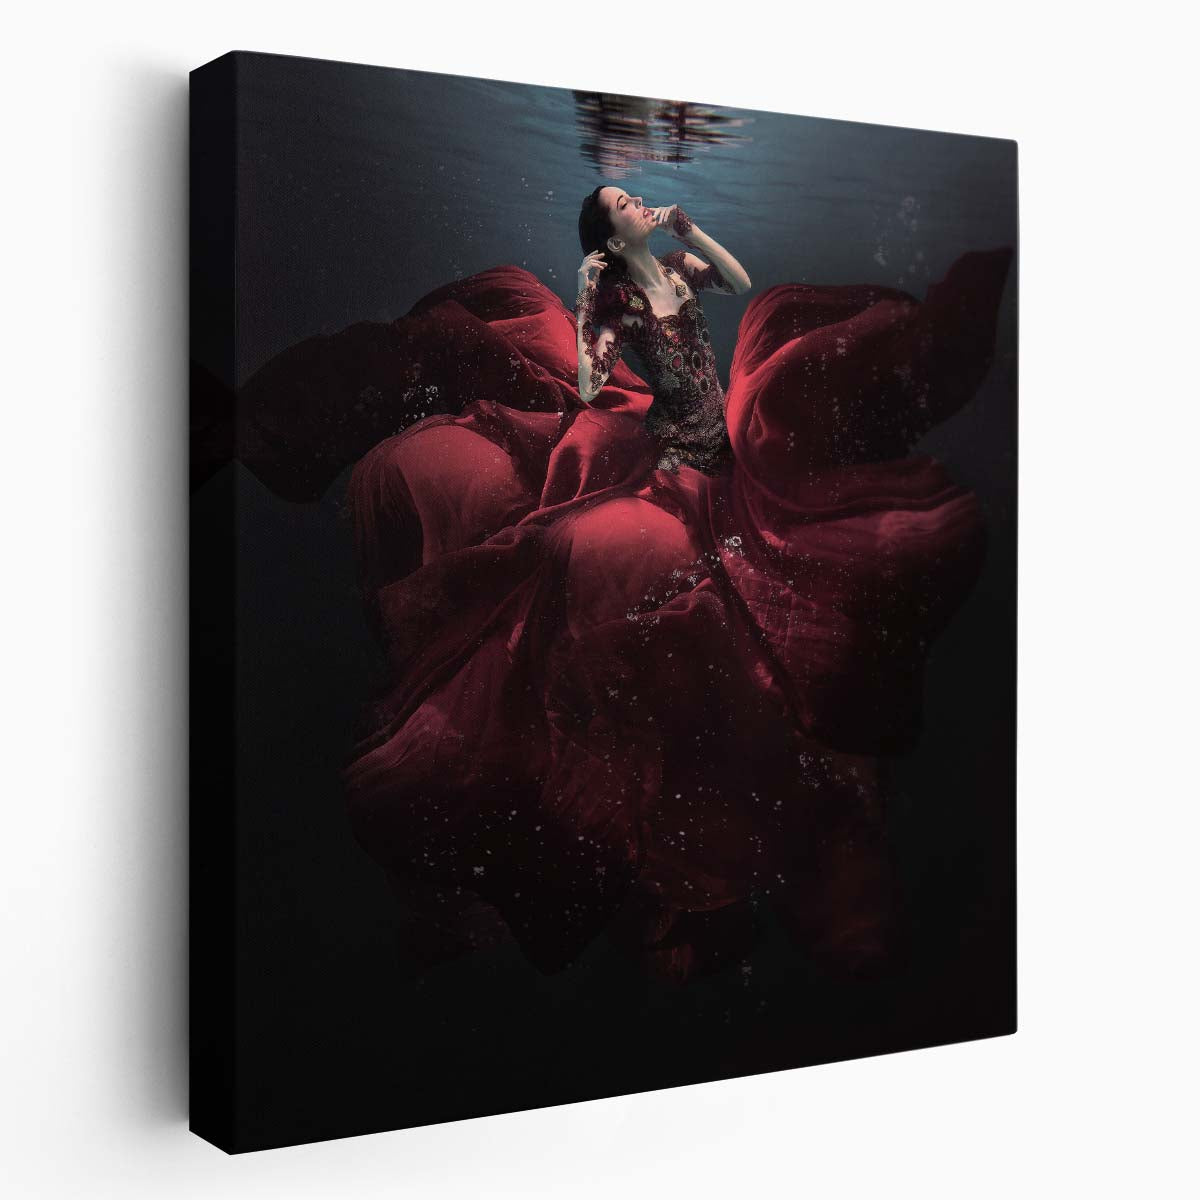 Enchanting Lady in Red with Roses Underwater Photography Wall Art by Luxuriance Designs. Made in USA.